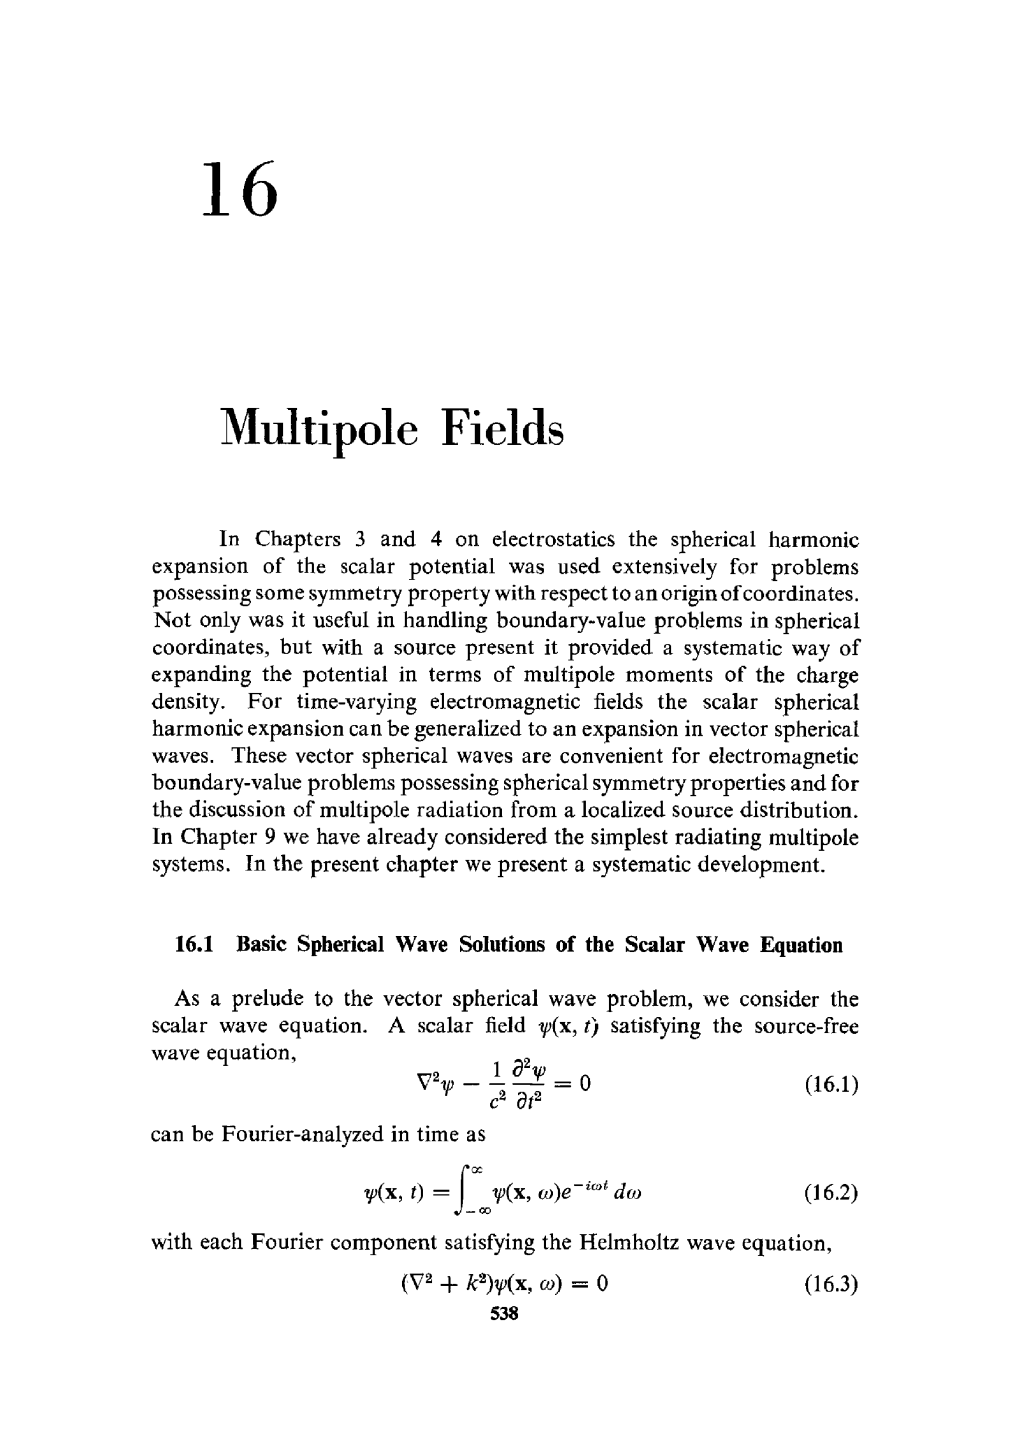 Classical Electrodynamics for the First Few Values of I the Explicit Forms Are